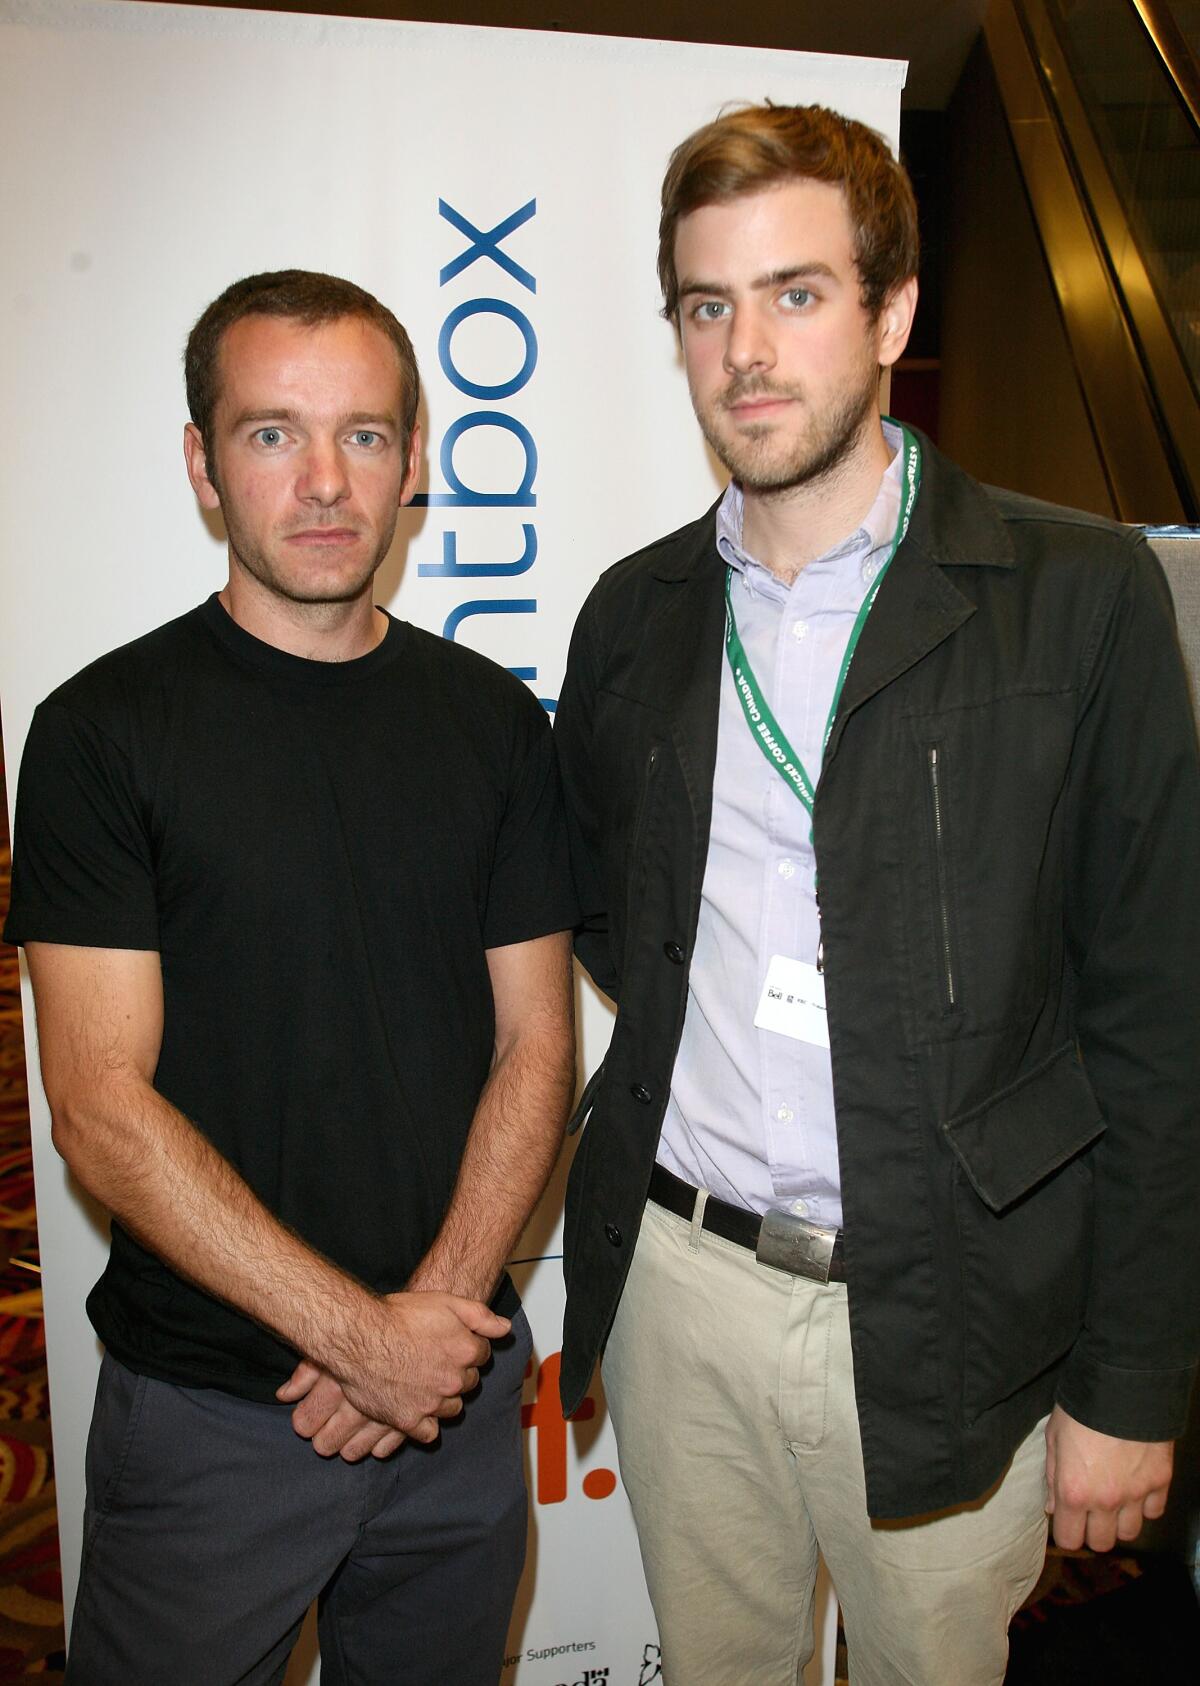 A shorter man clad in a black T-shirt crosses his hands in front of him next to a taller man in a black jacket and khakis